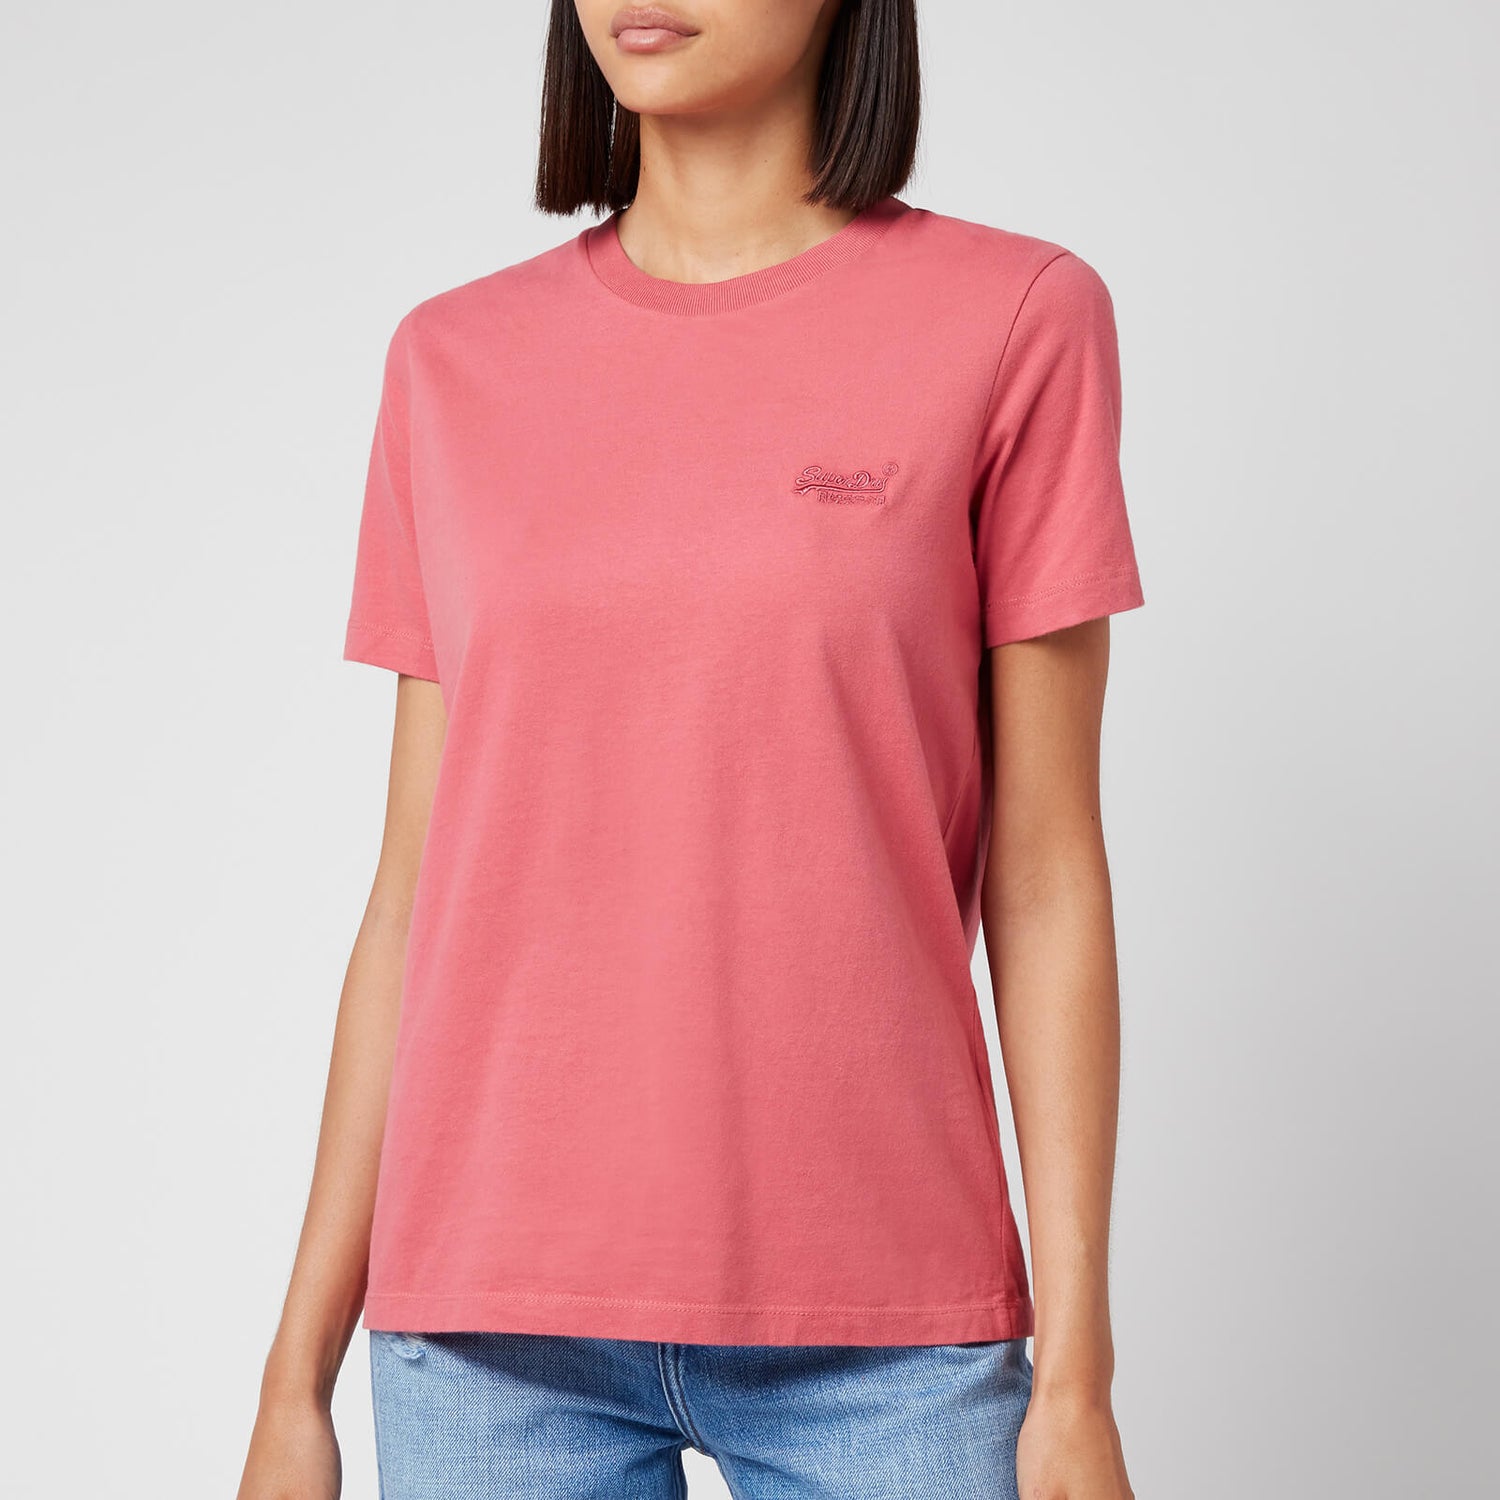 Superdry Women's Ol Classic T-Shirt - Dusty Pink